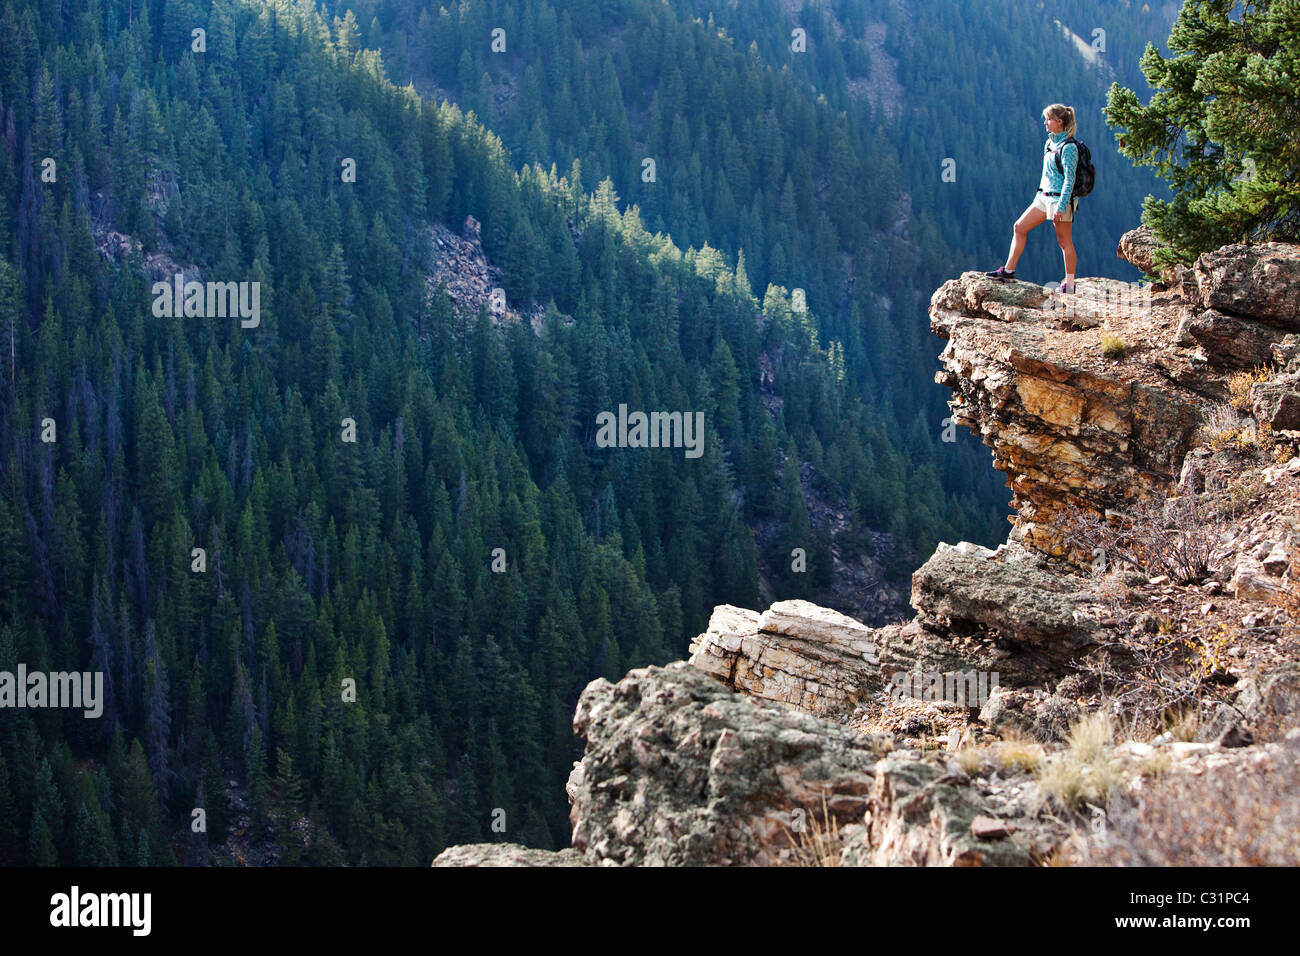 A young woman hiking takes a look over the edge of the canyon. Stock Photo